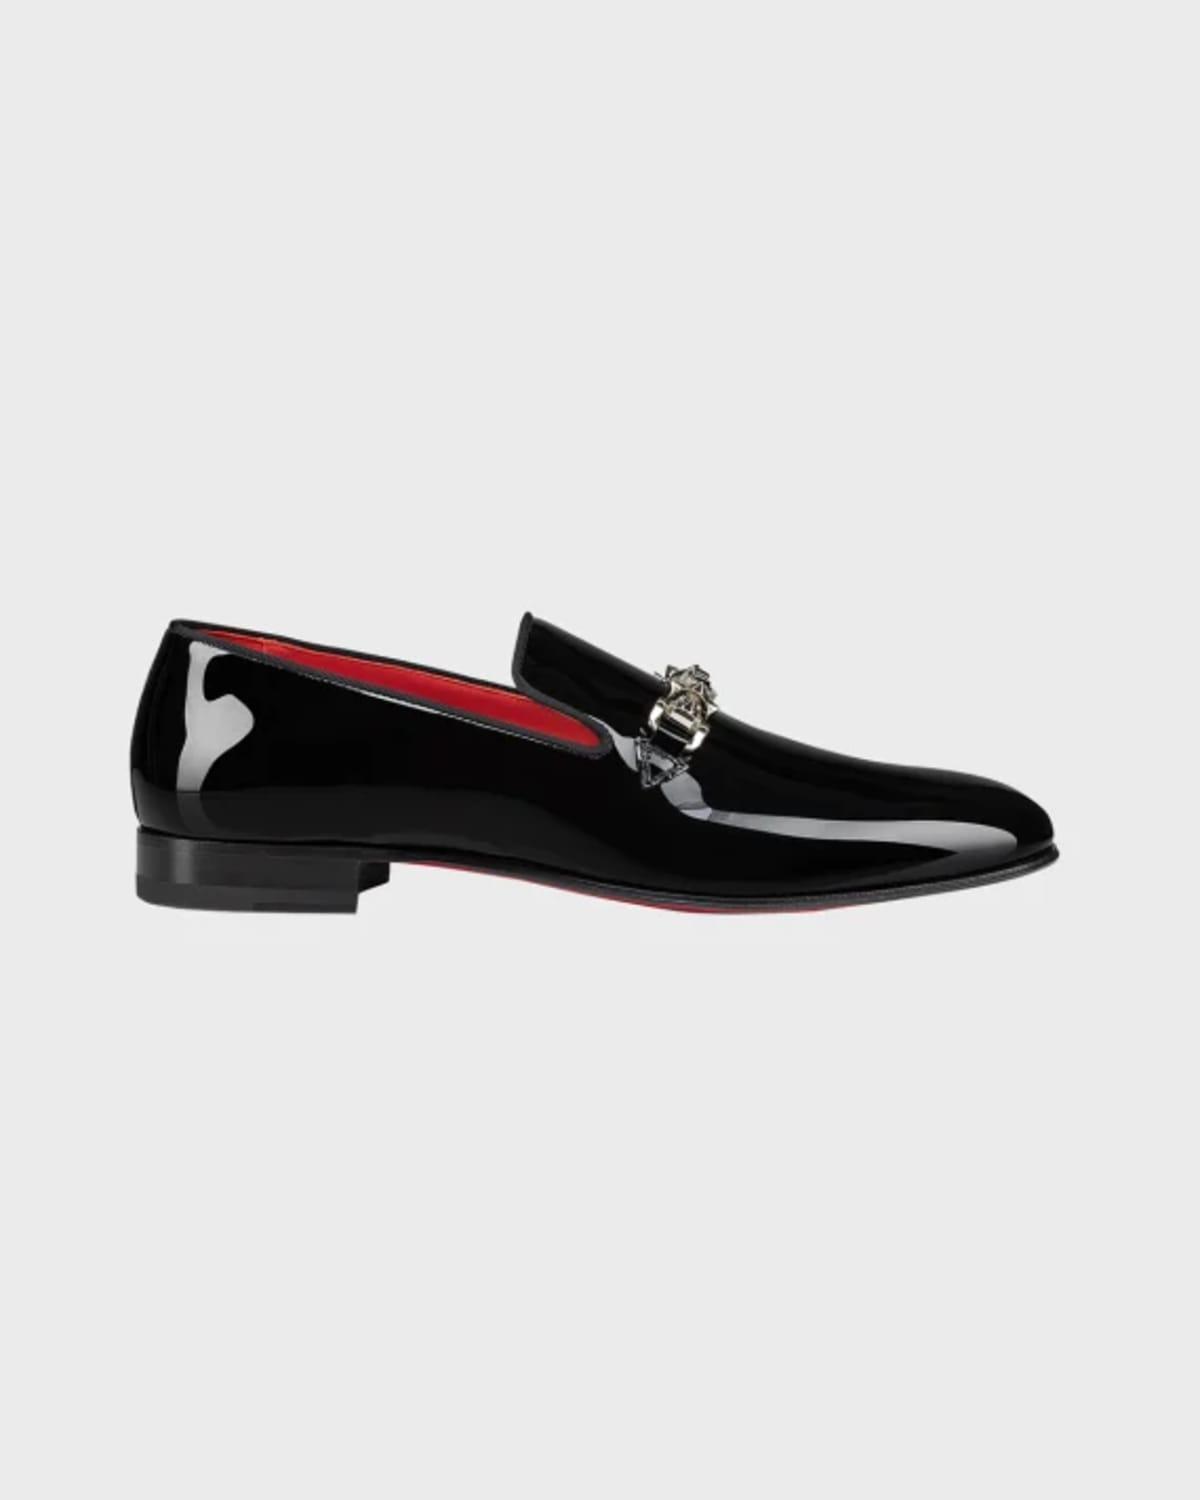 Christian Louboutin Equiswing Patent Bit Loafer Product Image